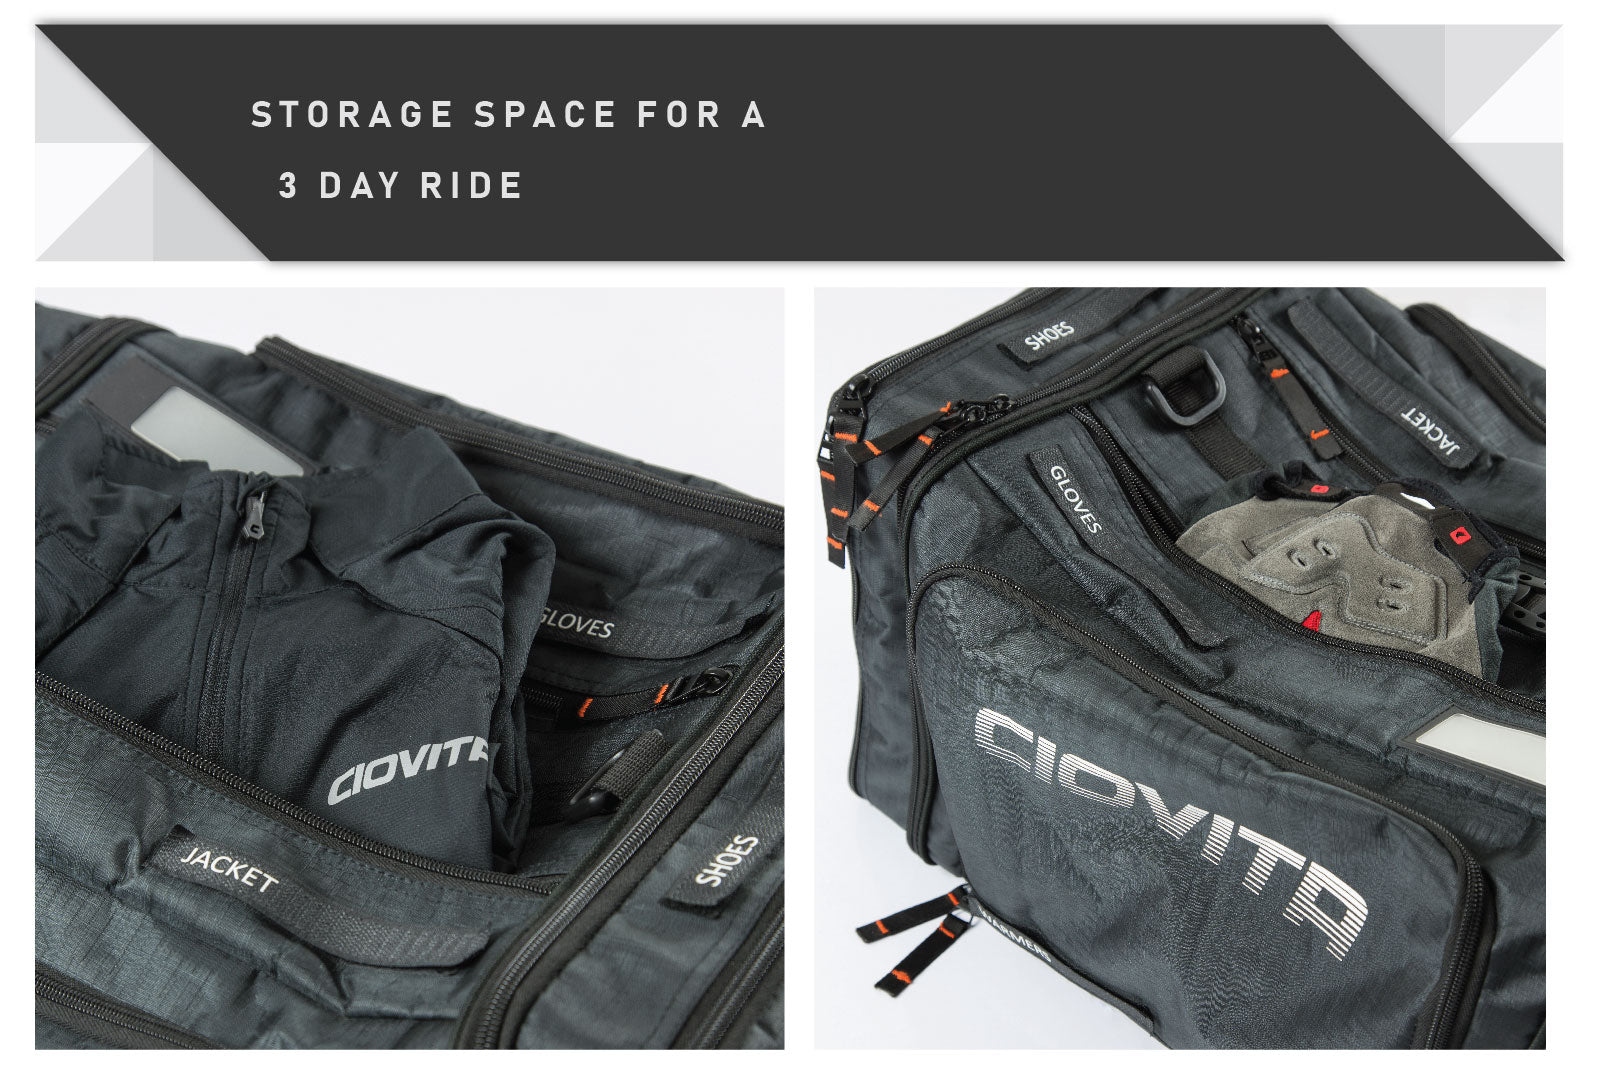 cycling kit bag with lots of storage space